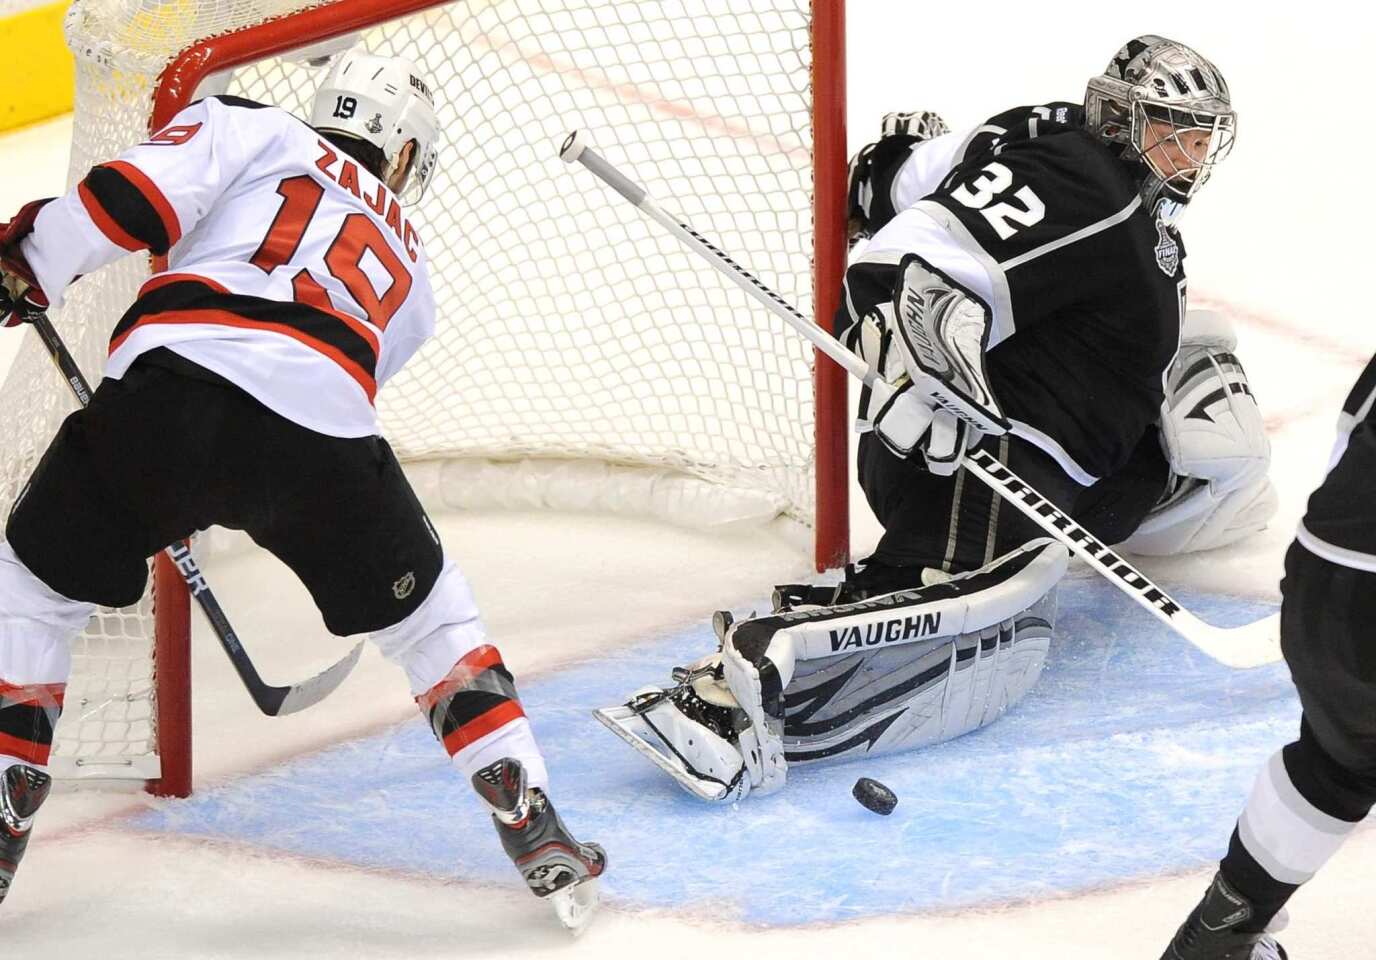 Kings goalie Jonathan Quick makes a save as New Jersey forward Travis Zajac tries to get to a rebound during the Kings' 4-0 victory in Game 3 of the Stanley Cup Final at Staples Center.